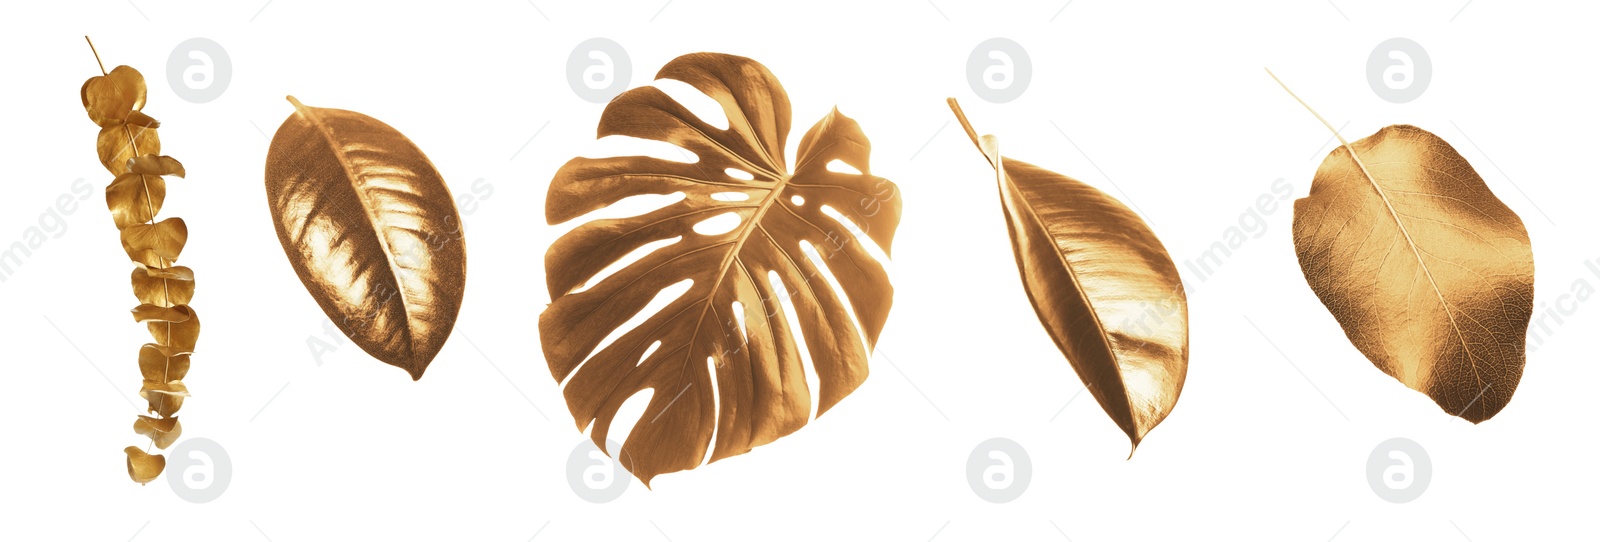 Image of Collage with different gold painted leaves on white background